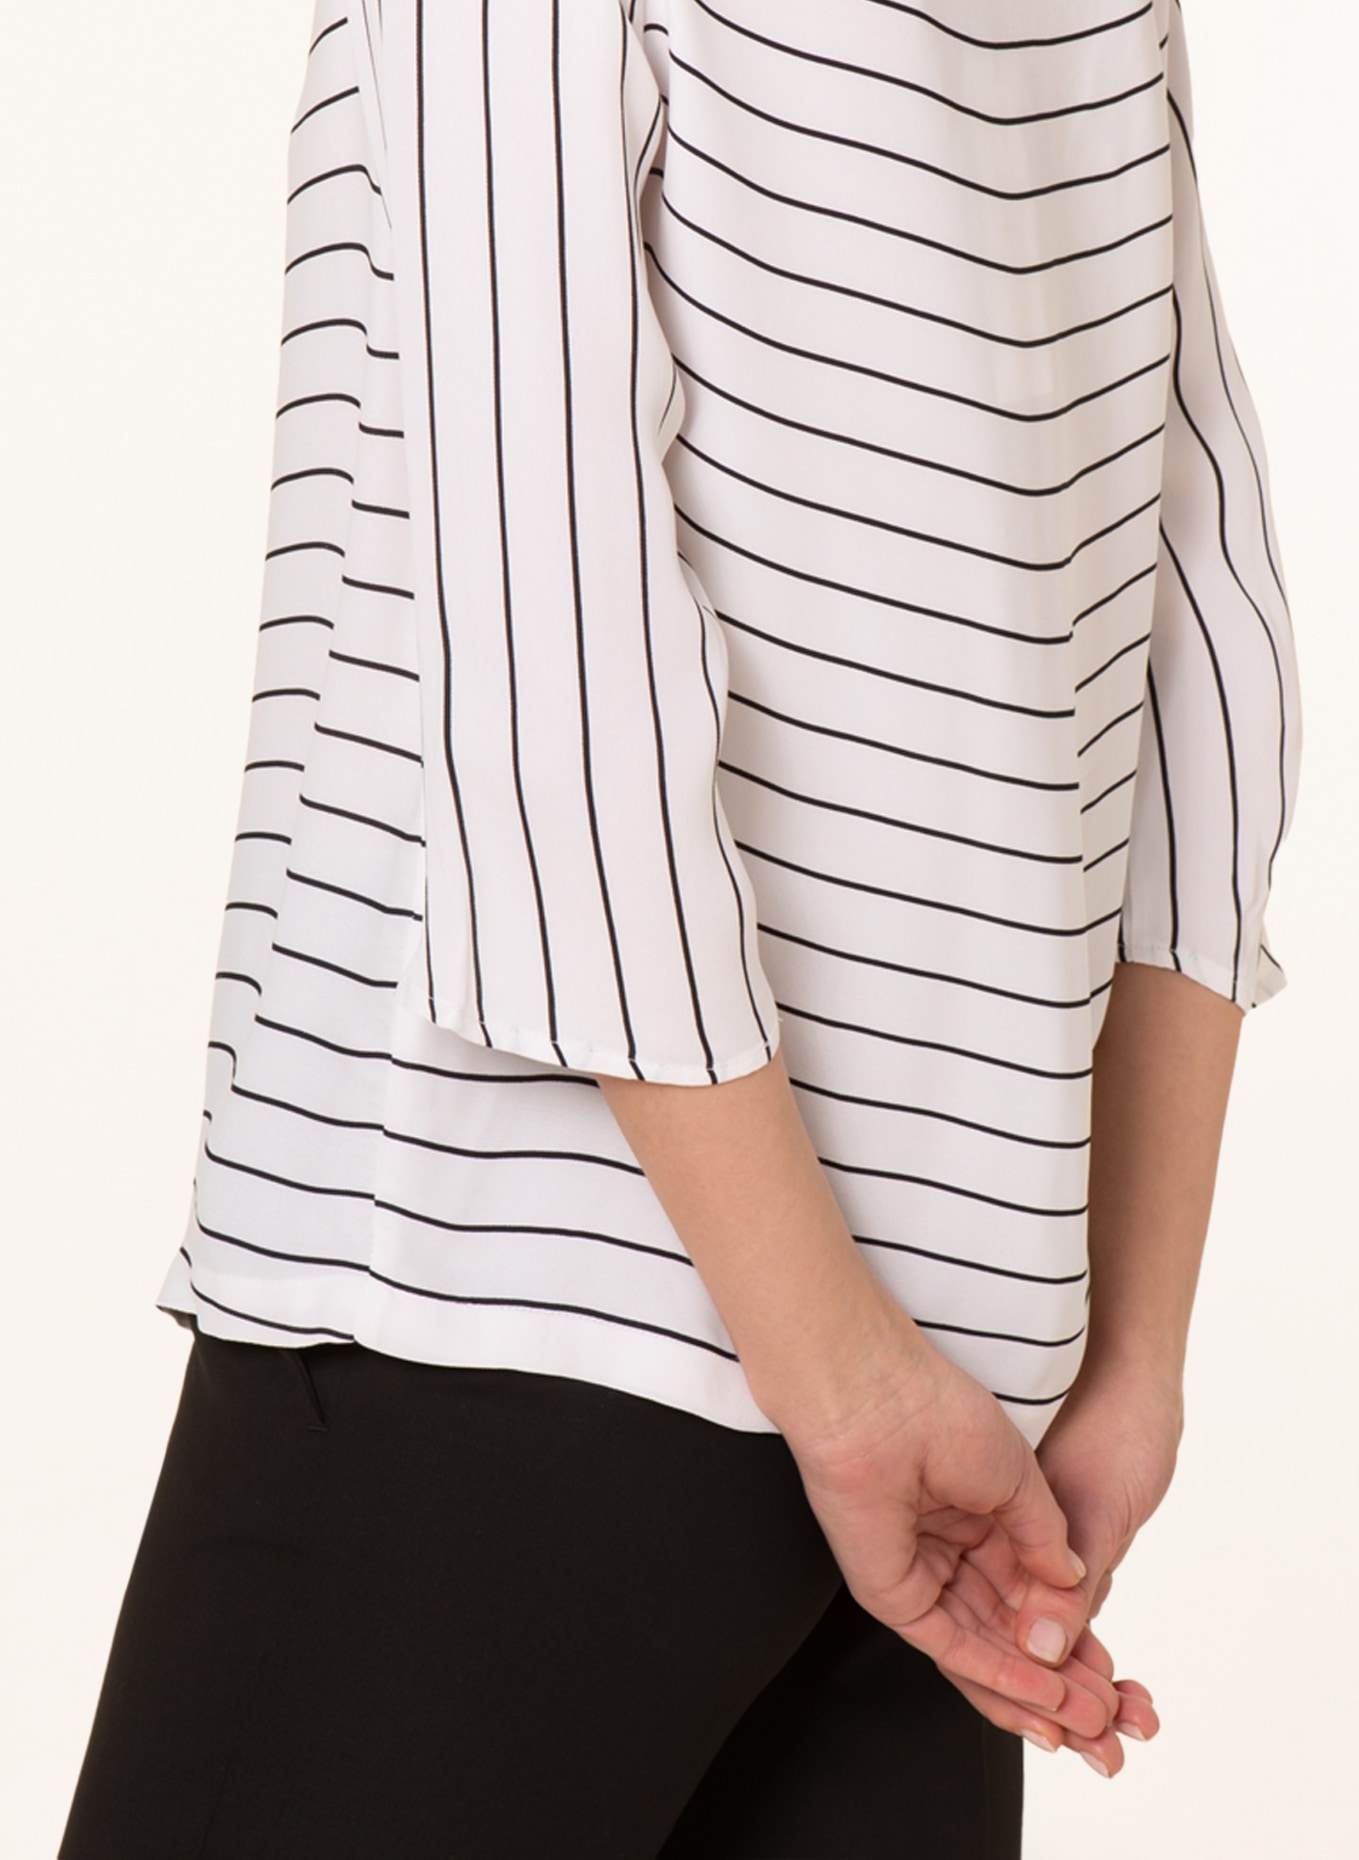 white/ 3/4 Shirt black in sleeves s.Oliver with LABEL BLACK blouse